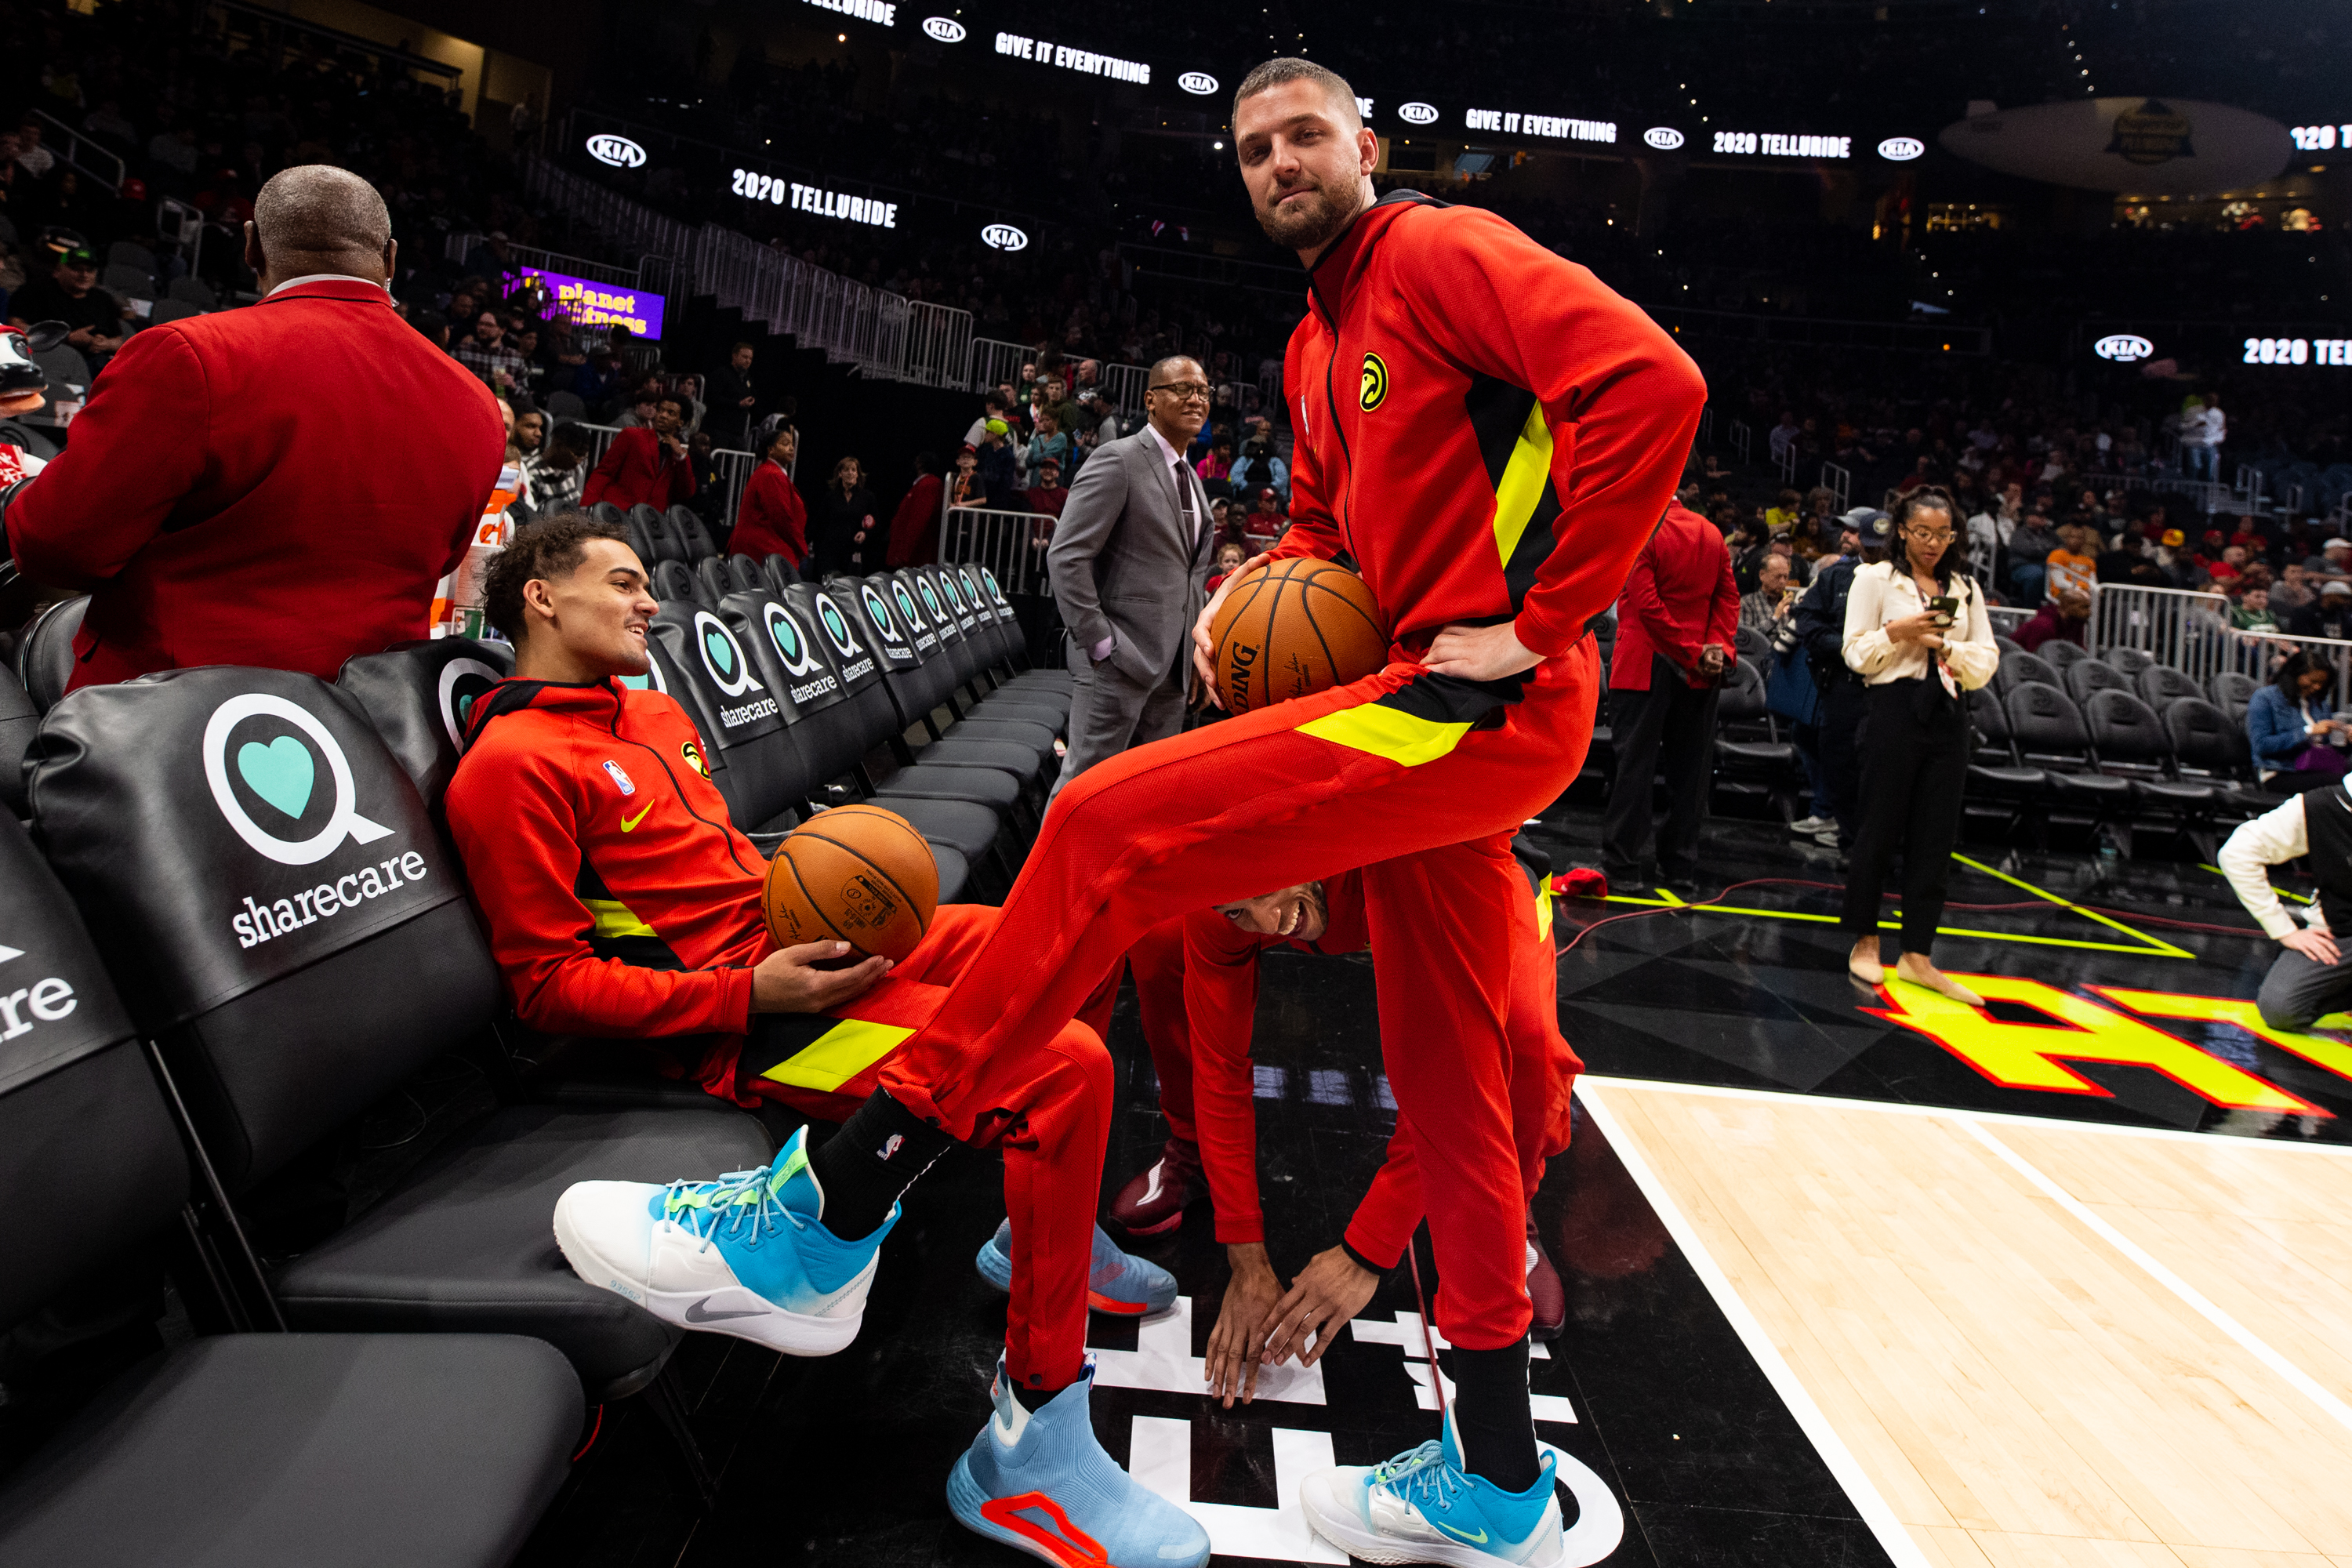 Trae Young and Chandler Parsons of the Atlanta Hawks looks on prior to a game